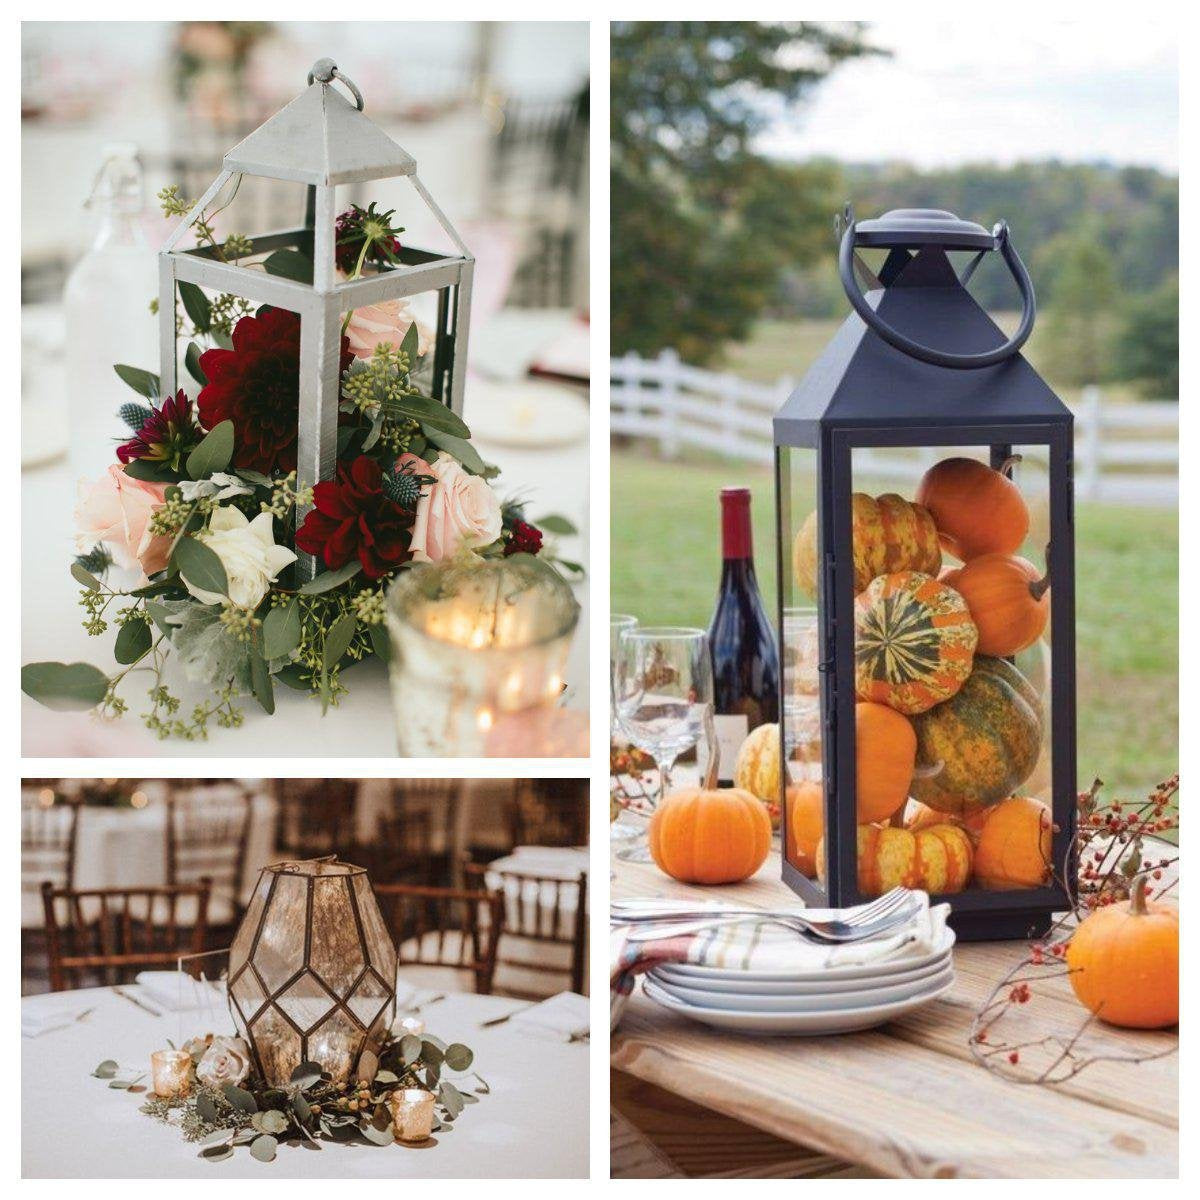 DIY Fall Themed Centerpiece with Lights